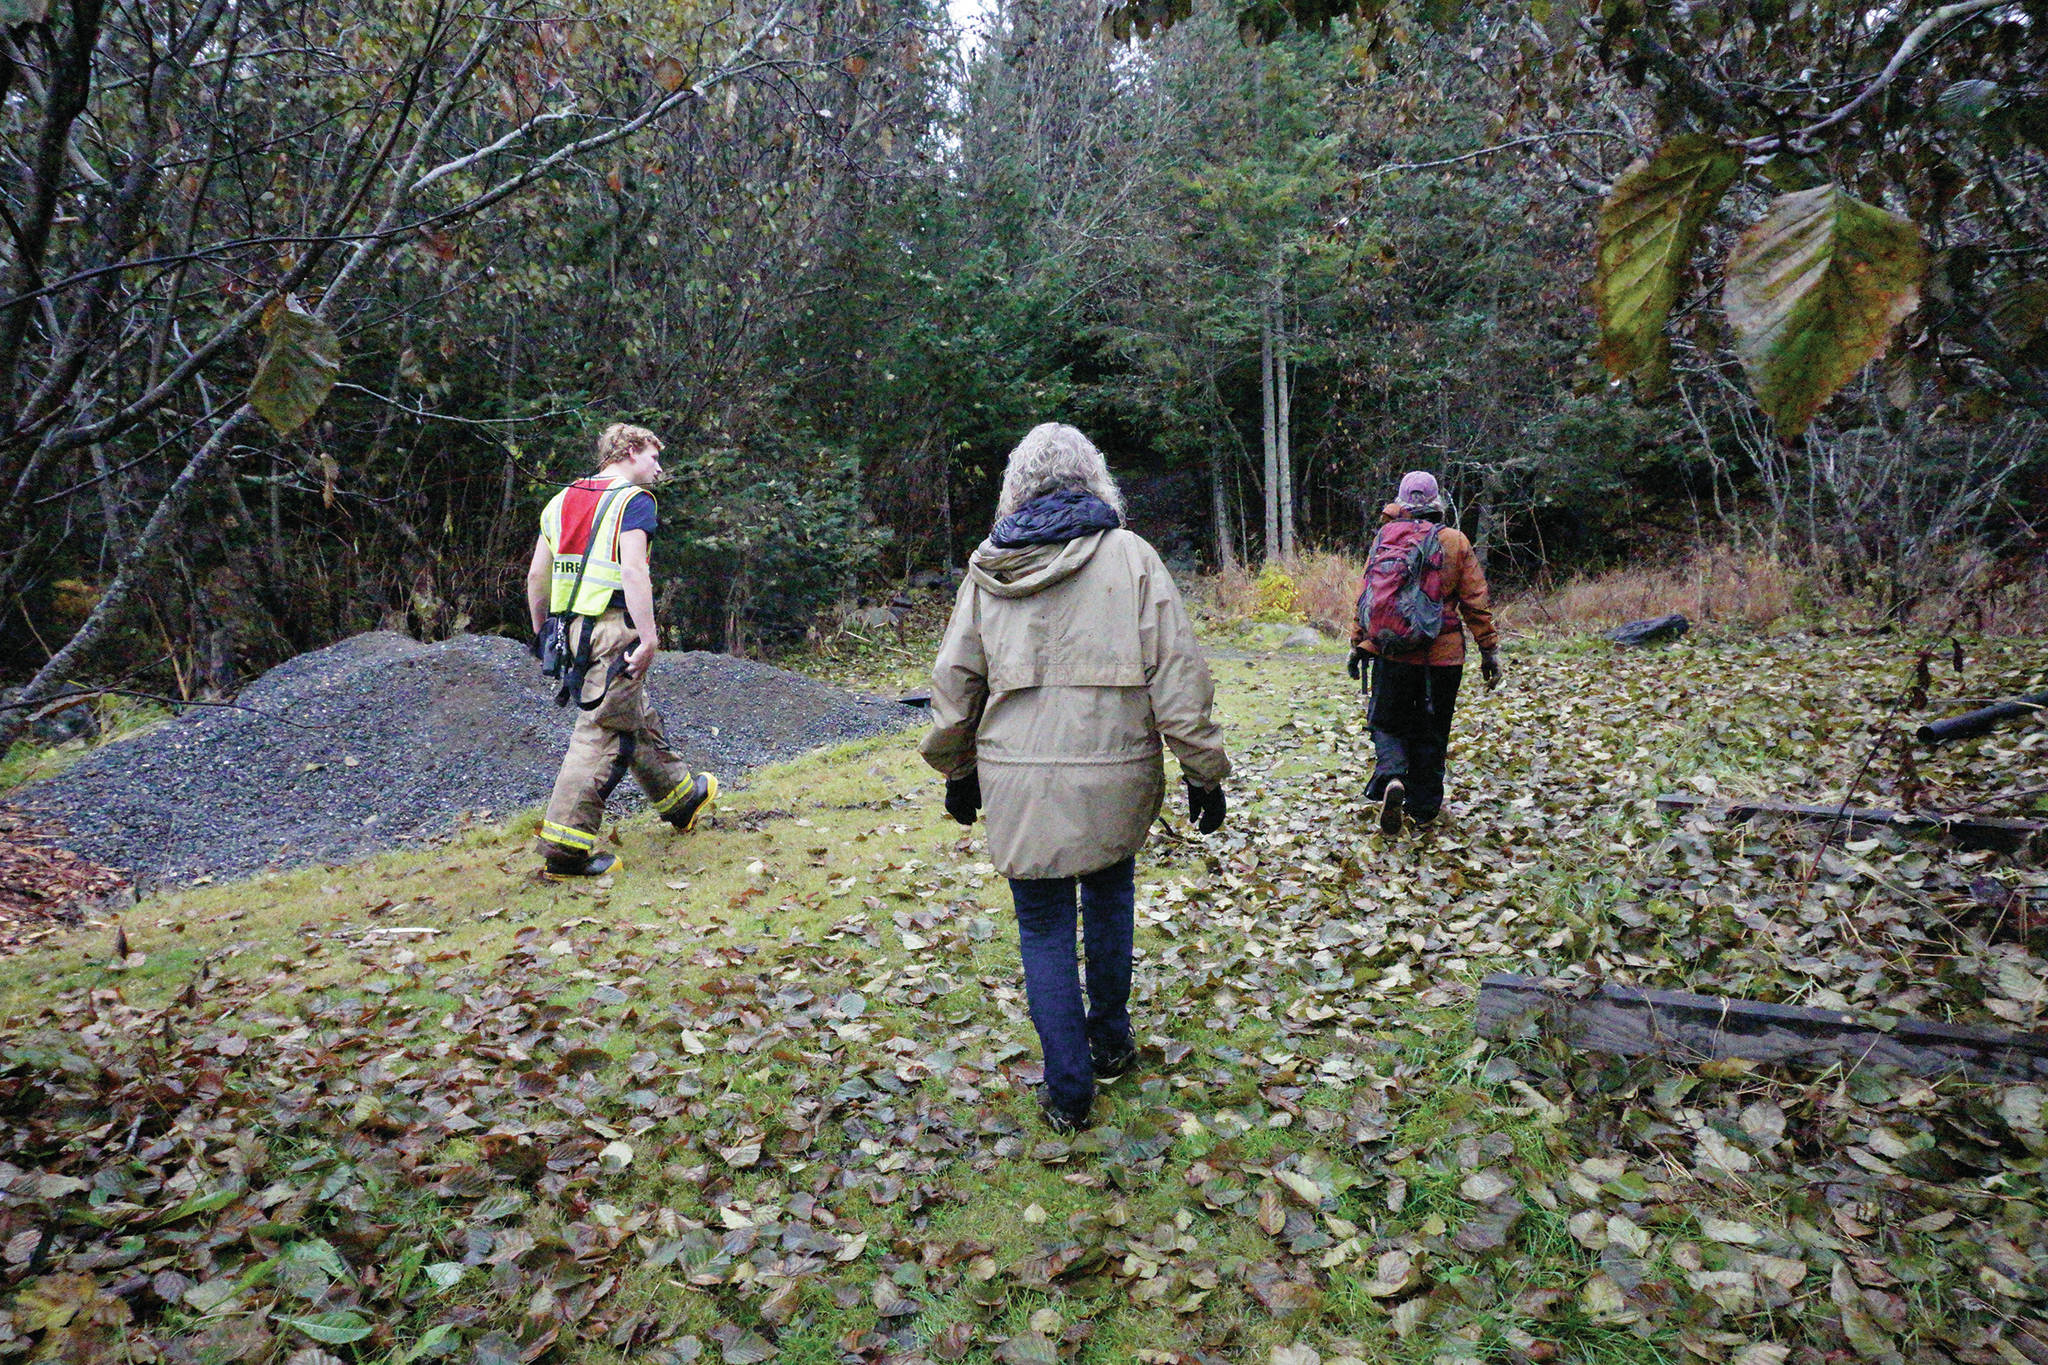 Casey Fetterhoff, left, with the Homer Volunteer Fire Department, leads a search on Sunday, Oct. 20, 2019, off Main Street and Pioneer Avenue for Anesha “Duffy” Murnane, a Homer woman missing since Thursday, Oct. 17, 2019, in Homer, Alaska. (Photo by Michael Armstrong/Homer News)